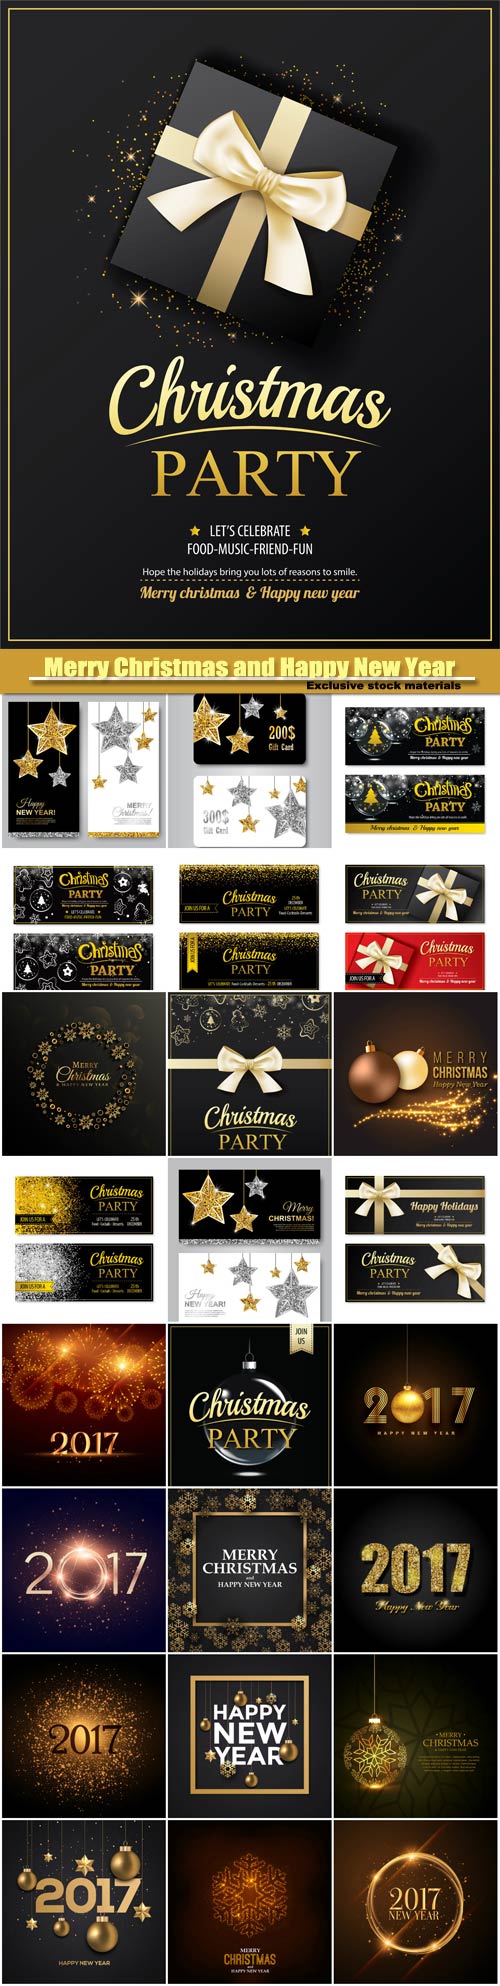 Merry Christmas and Happy New Year vector, invitation party banner, card design template, gold glittering